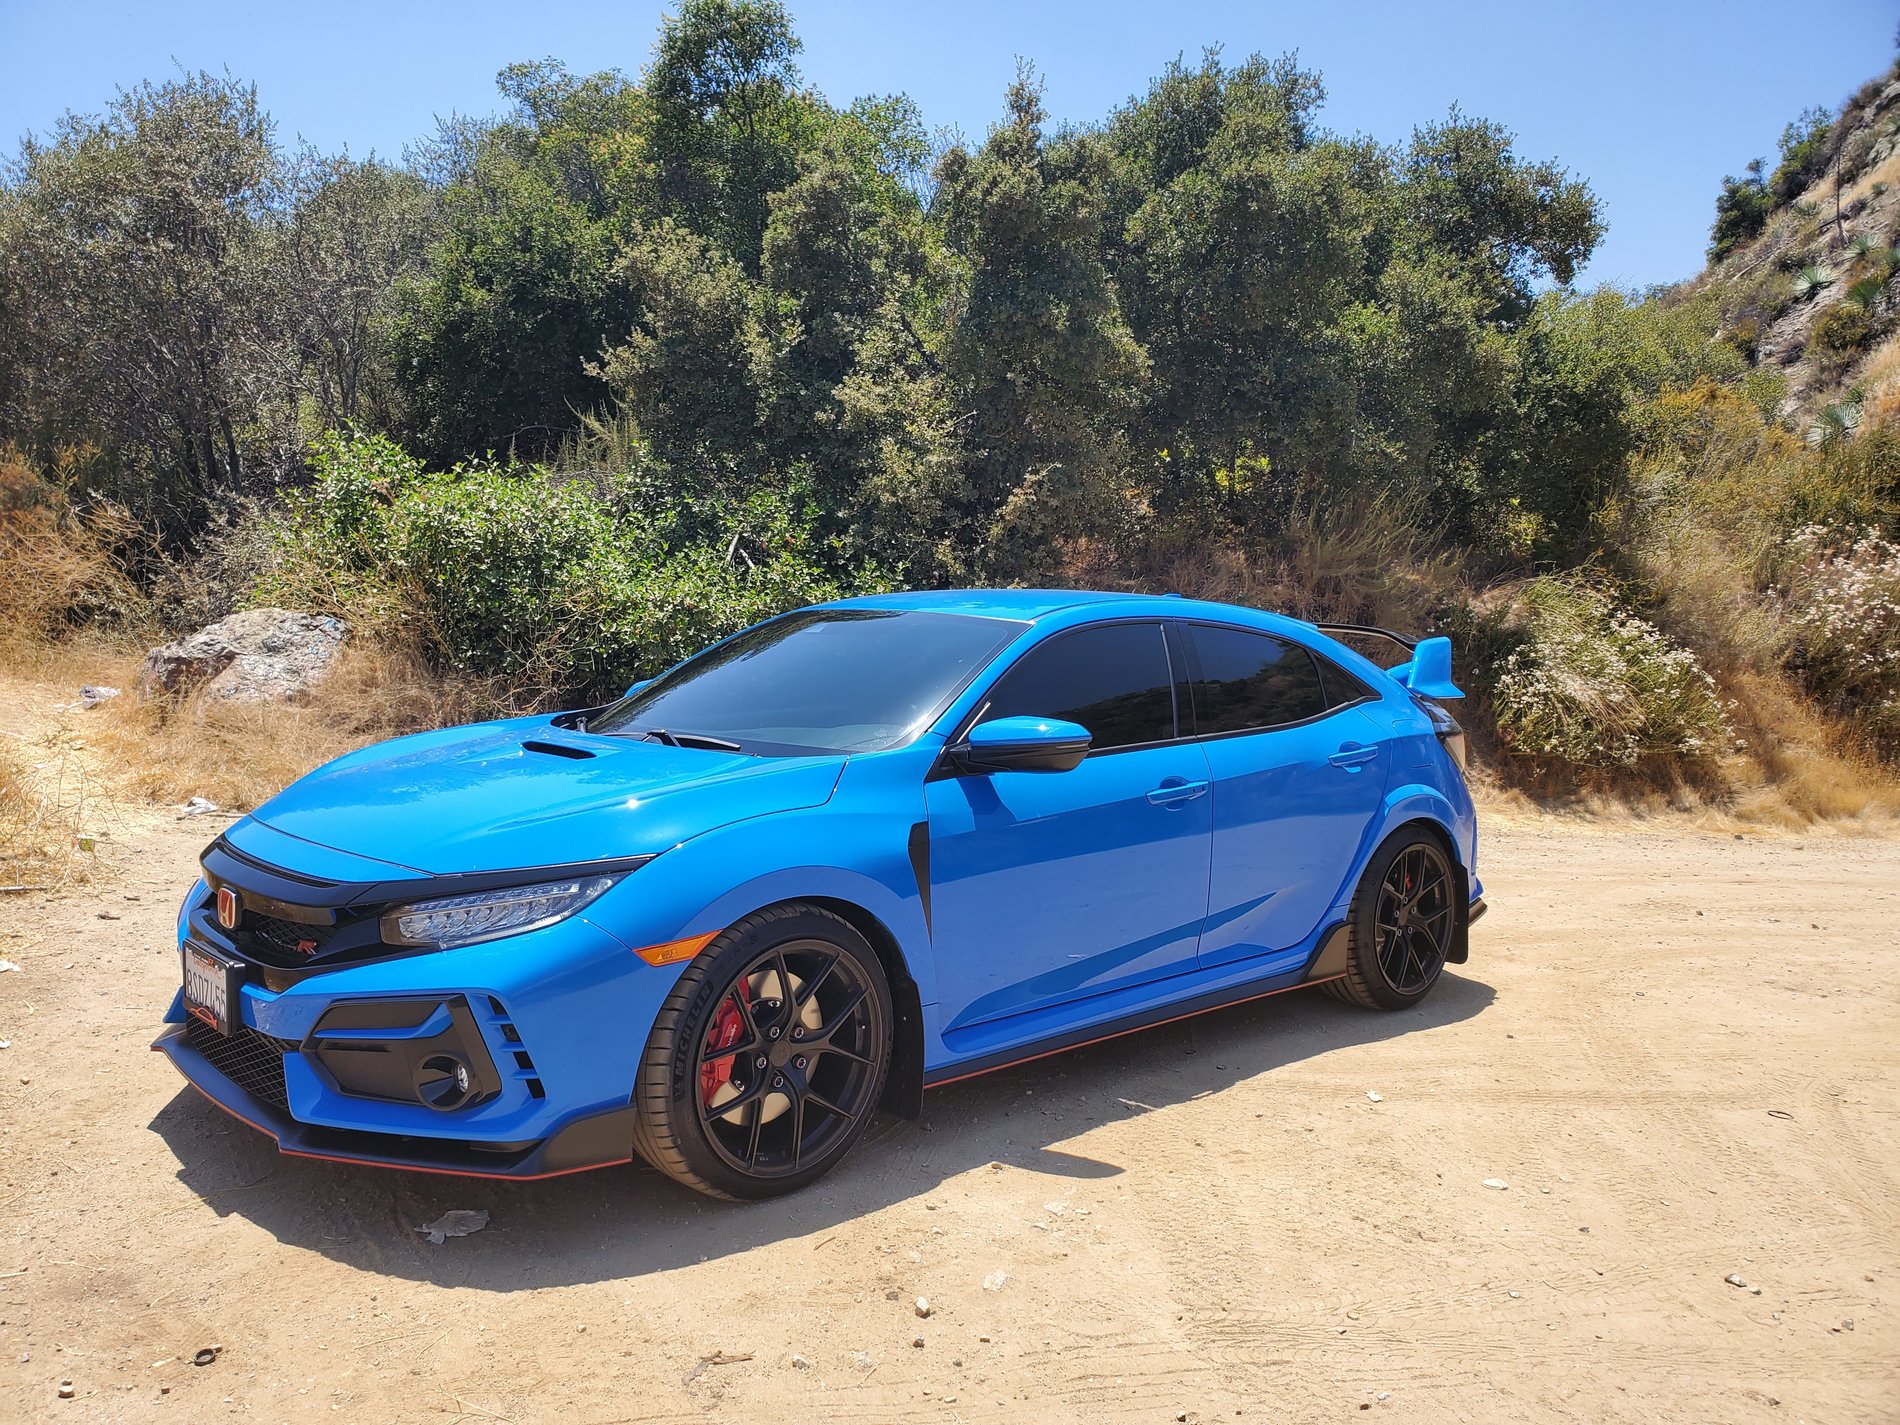 Honda Civic 10th gen Official 2020 Boost Blue Type R Picture Thread 20200627_132430